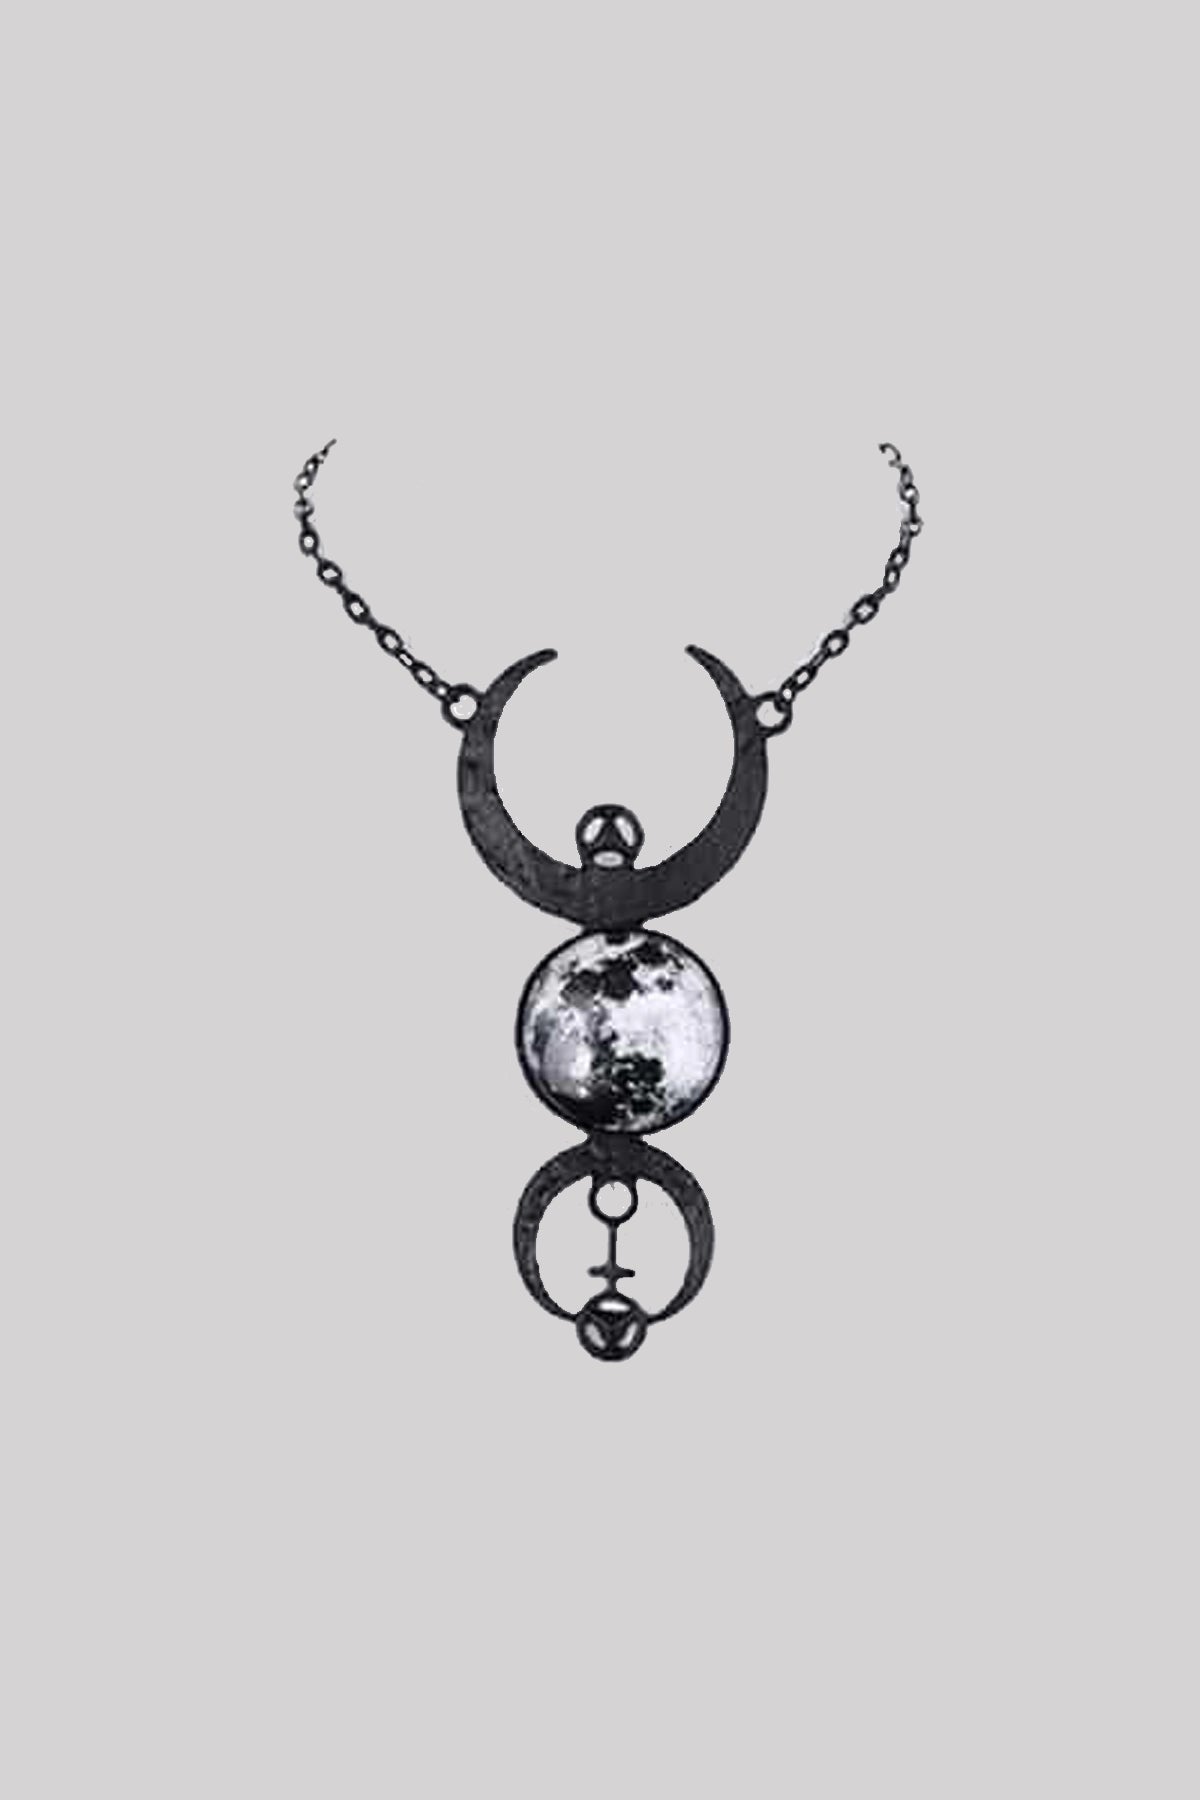 Restyle Black Full Crescent Moon Pendant Necklace